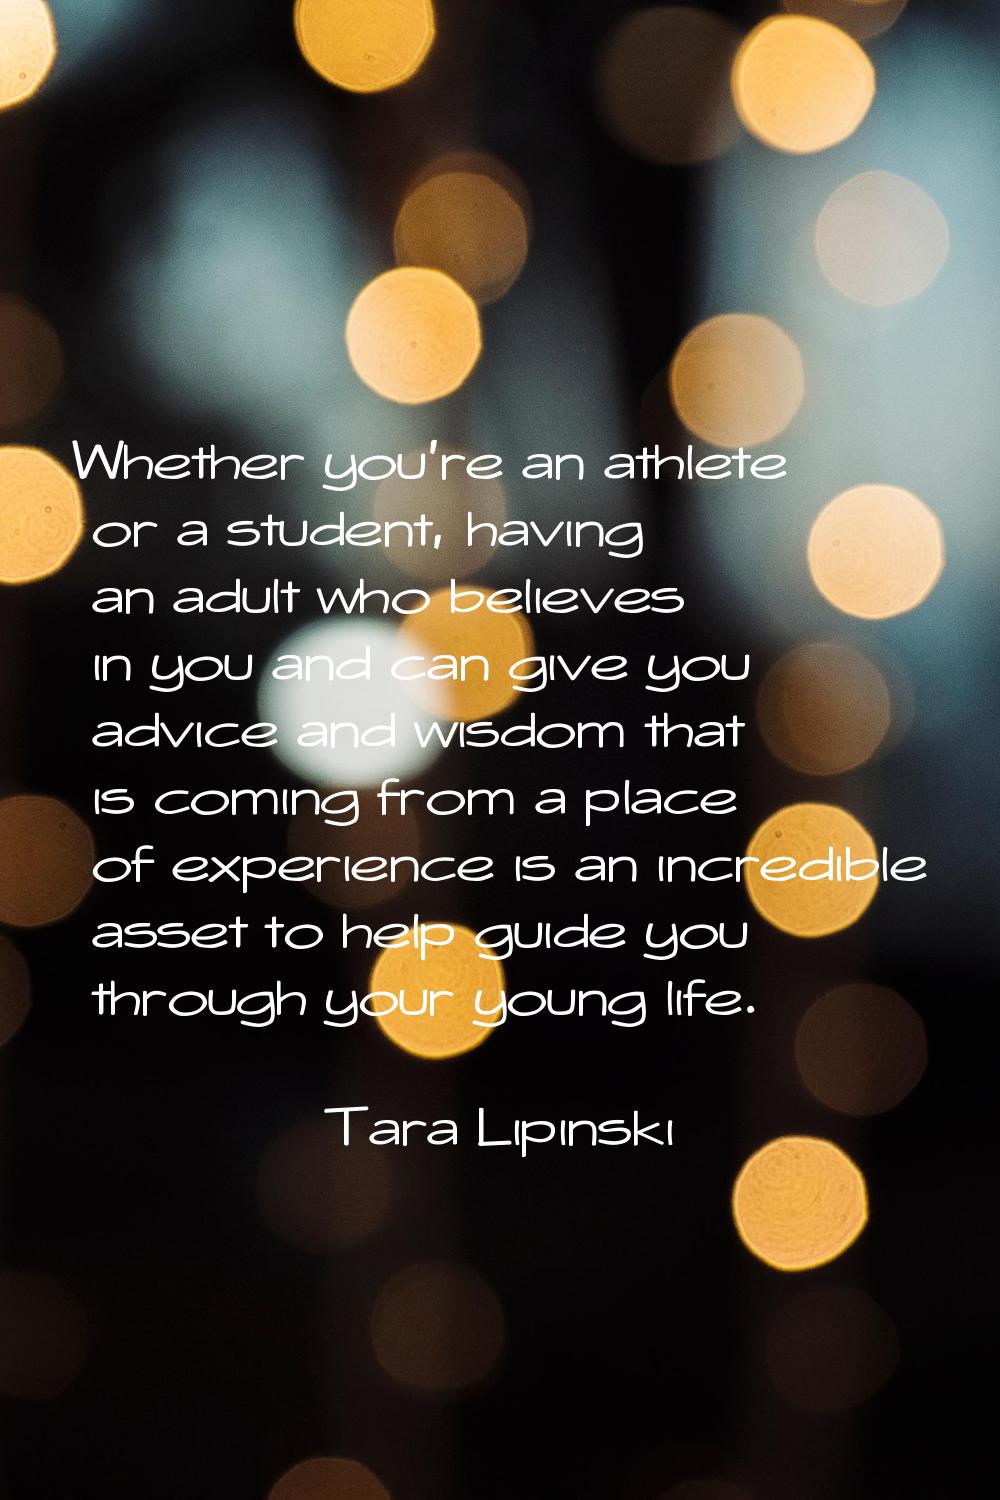 Whether you're an athlete or a student, having an adult who believes in you and can give you advice